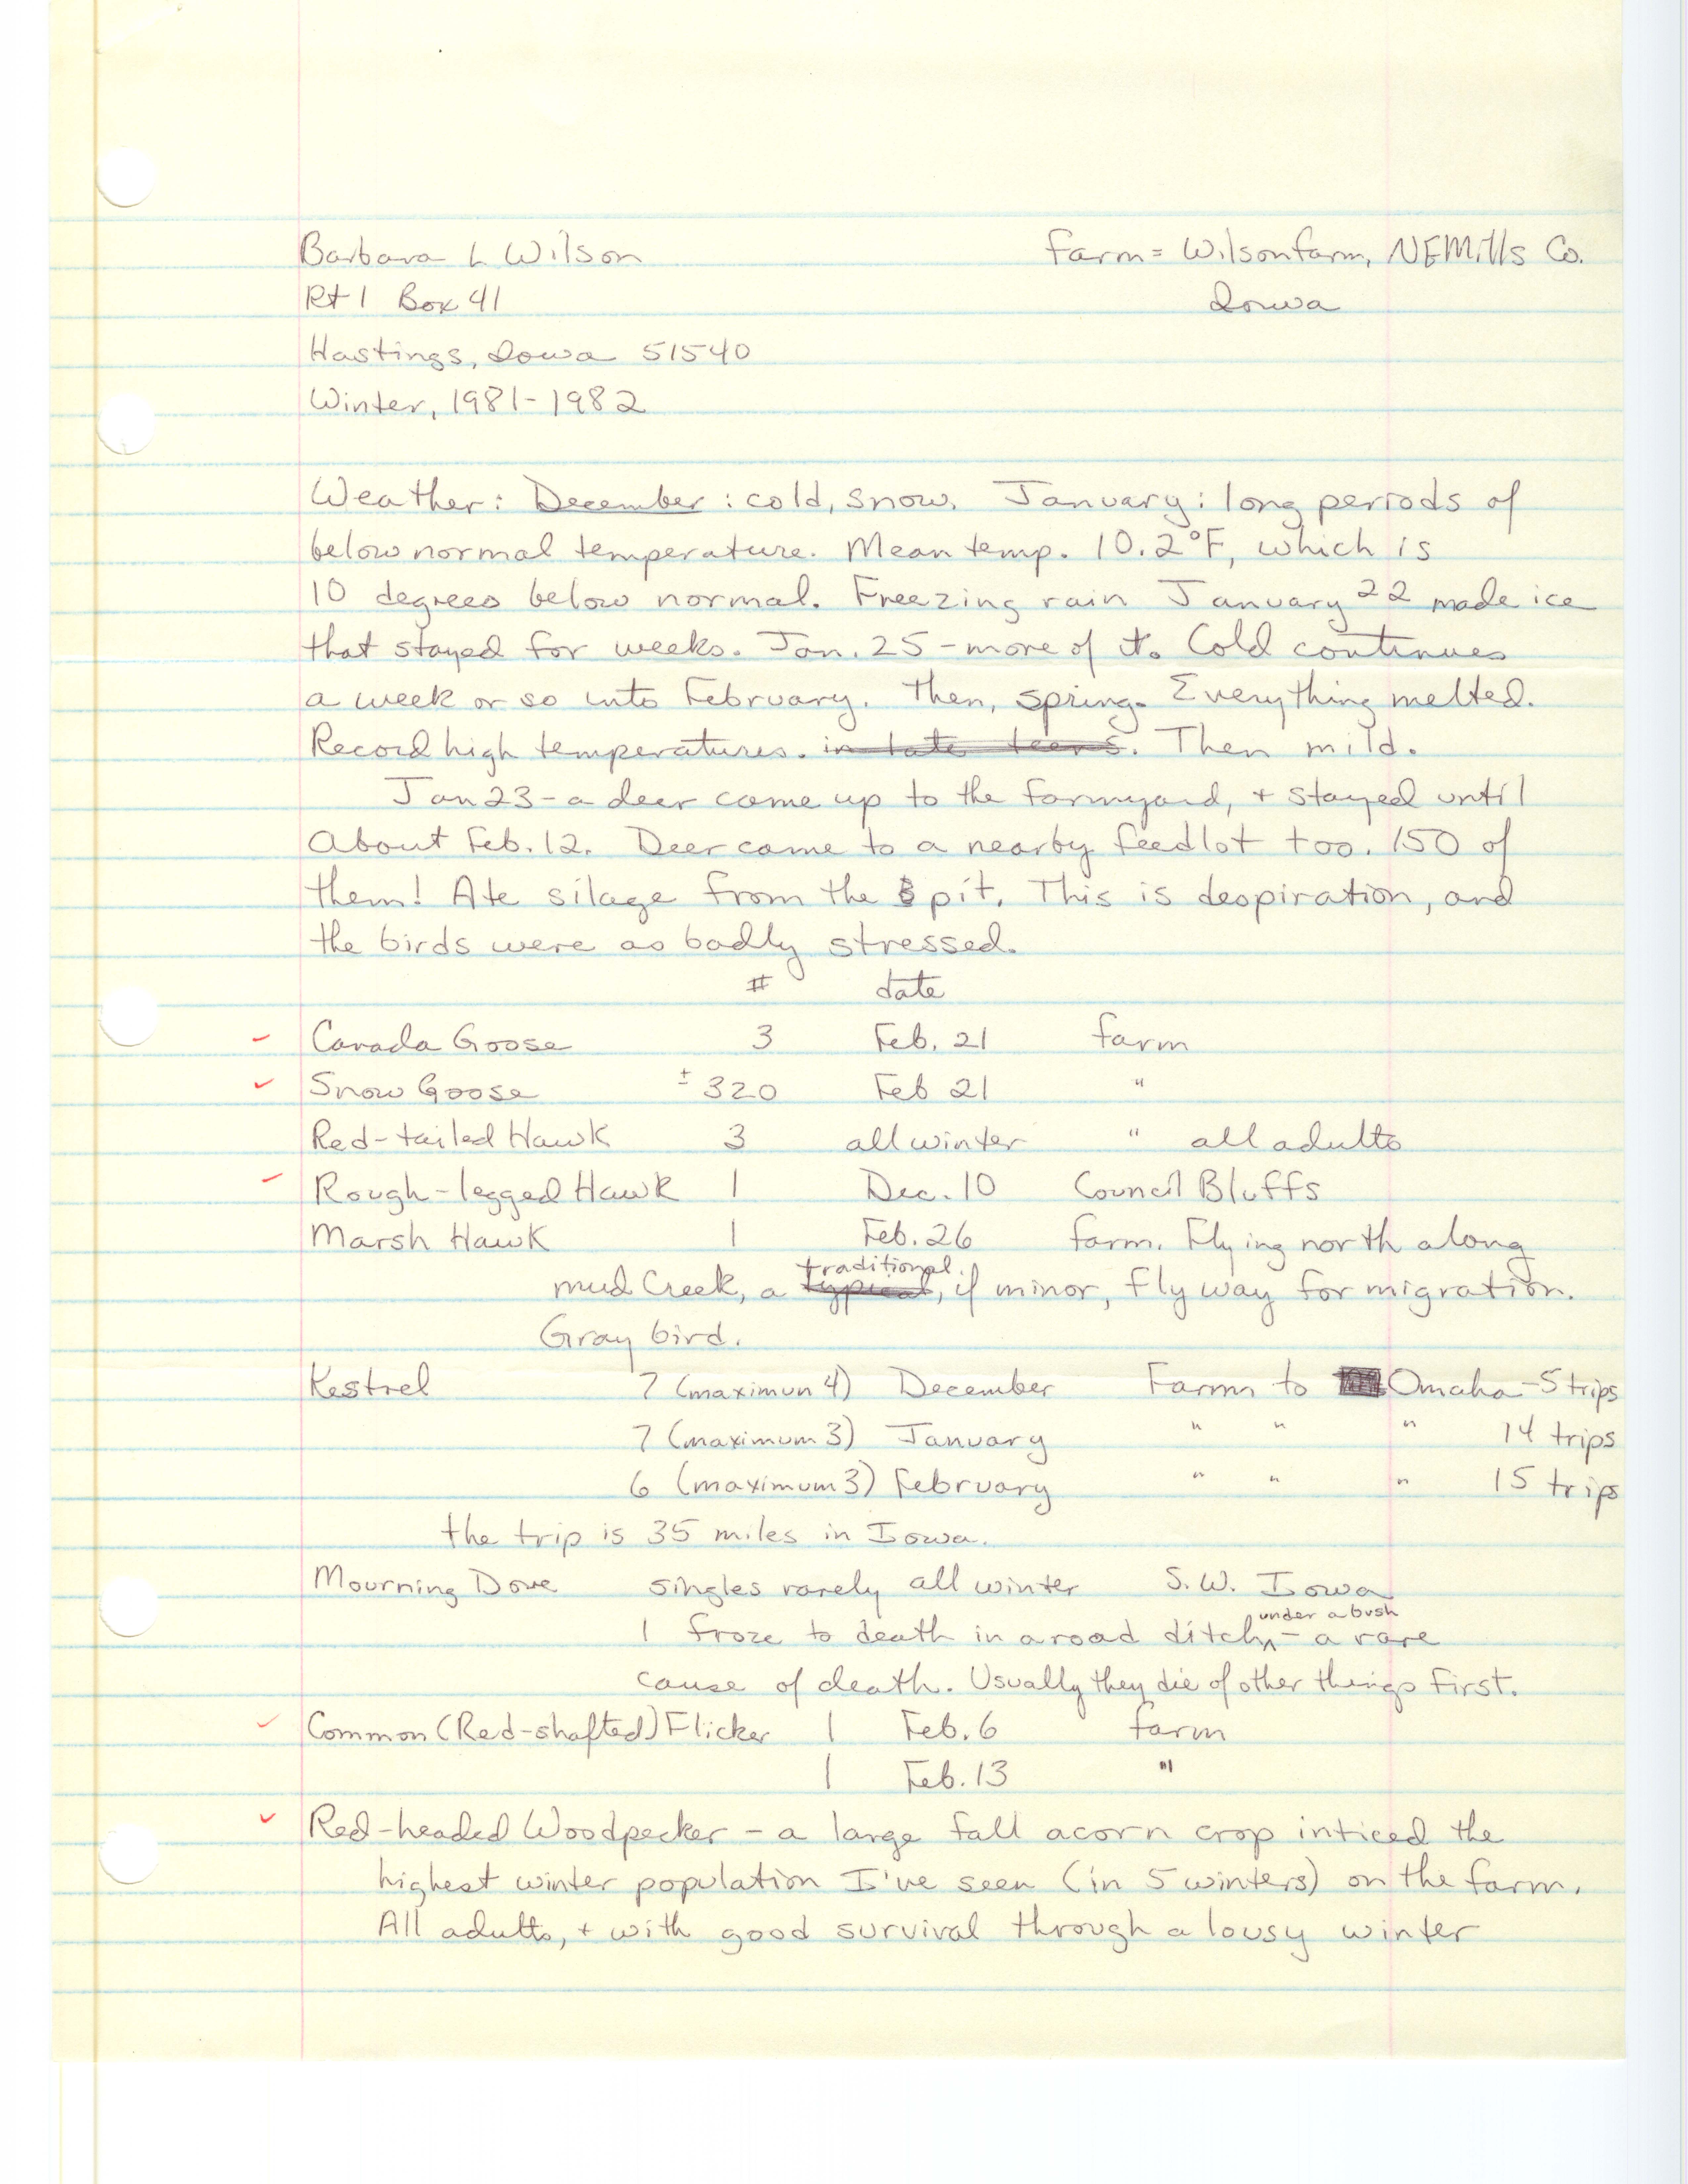 Field notes with additional documentation contributed by Barbara L. Wilson, winter 1981-1982